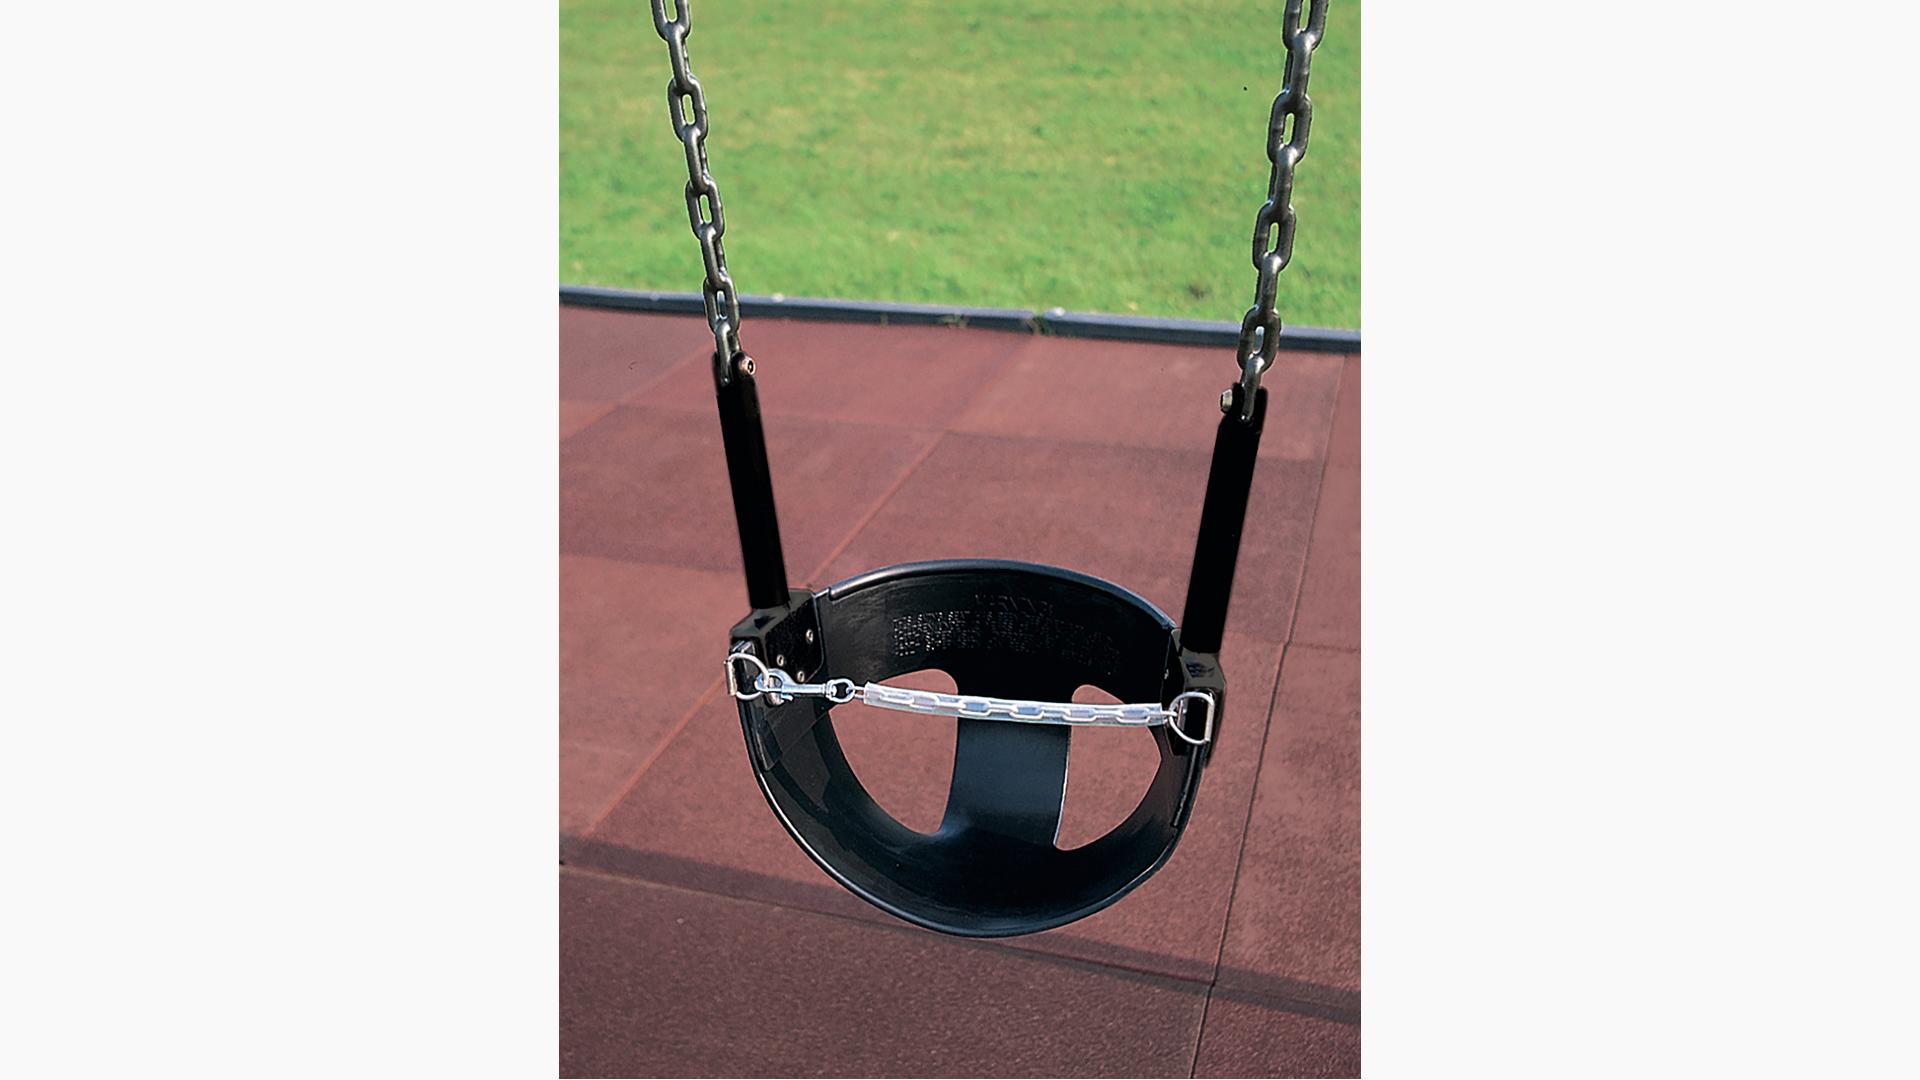 The Half-Bucket Seat with Chains is a playground swing seat option for children who need the support of a bucket seat with the easy access of a chain clasp.